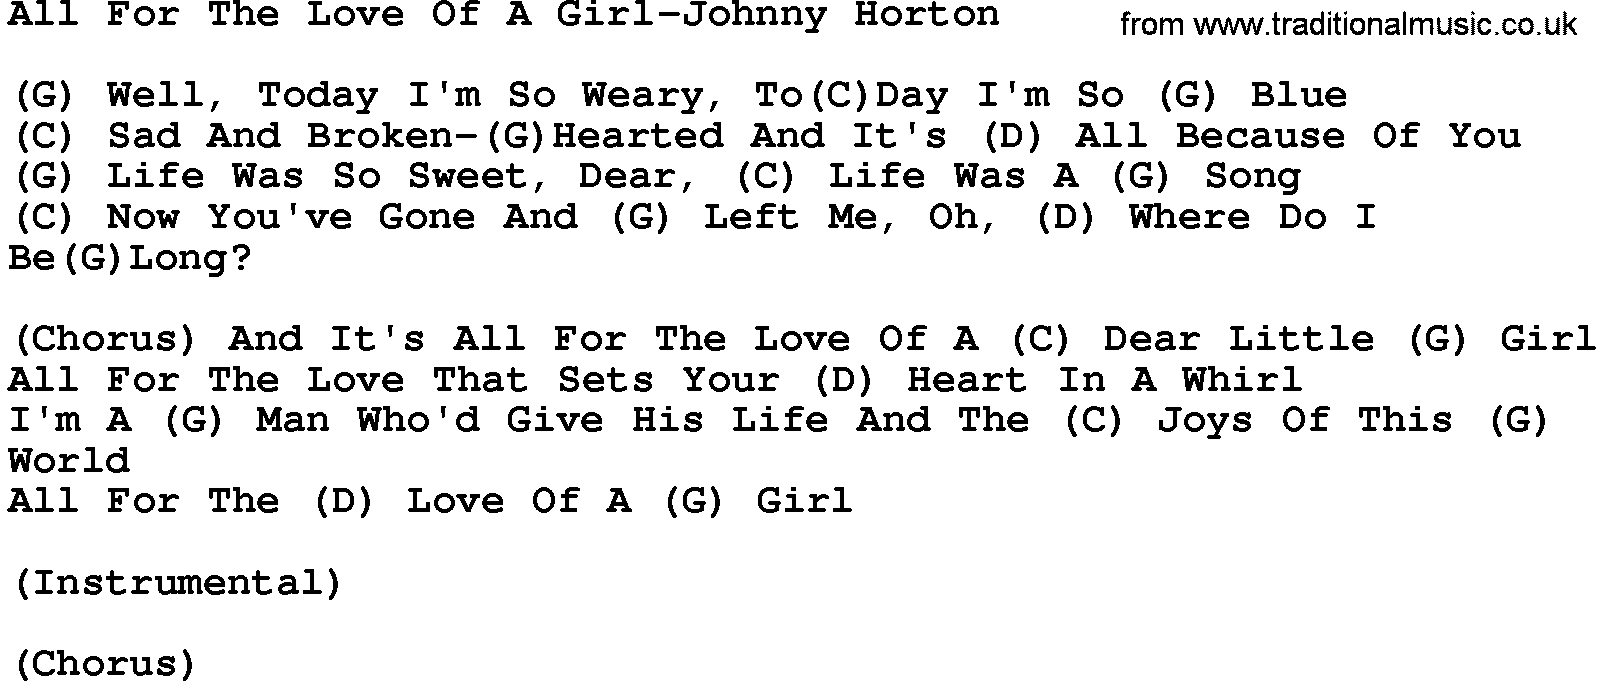 Country music song: All For The Love Of A Girl-Johnny Horton lyrics and chords